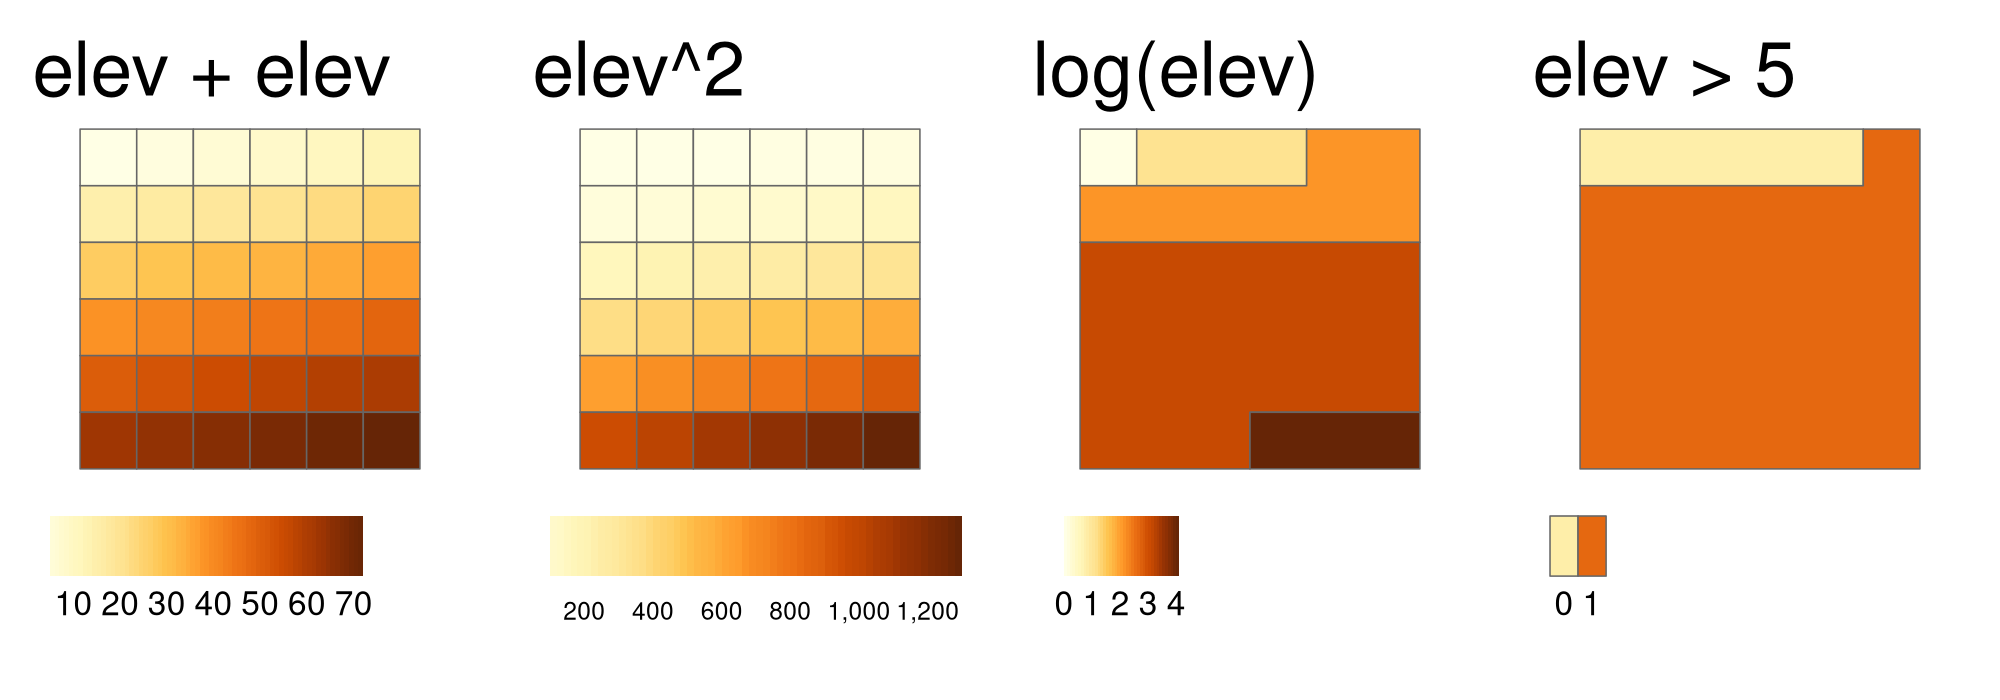 Examples of different local operations of the elev raster object: adding two rasters, squaring, applying logarithmic transformation, and performing a logical operation.